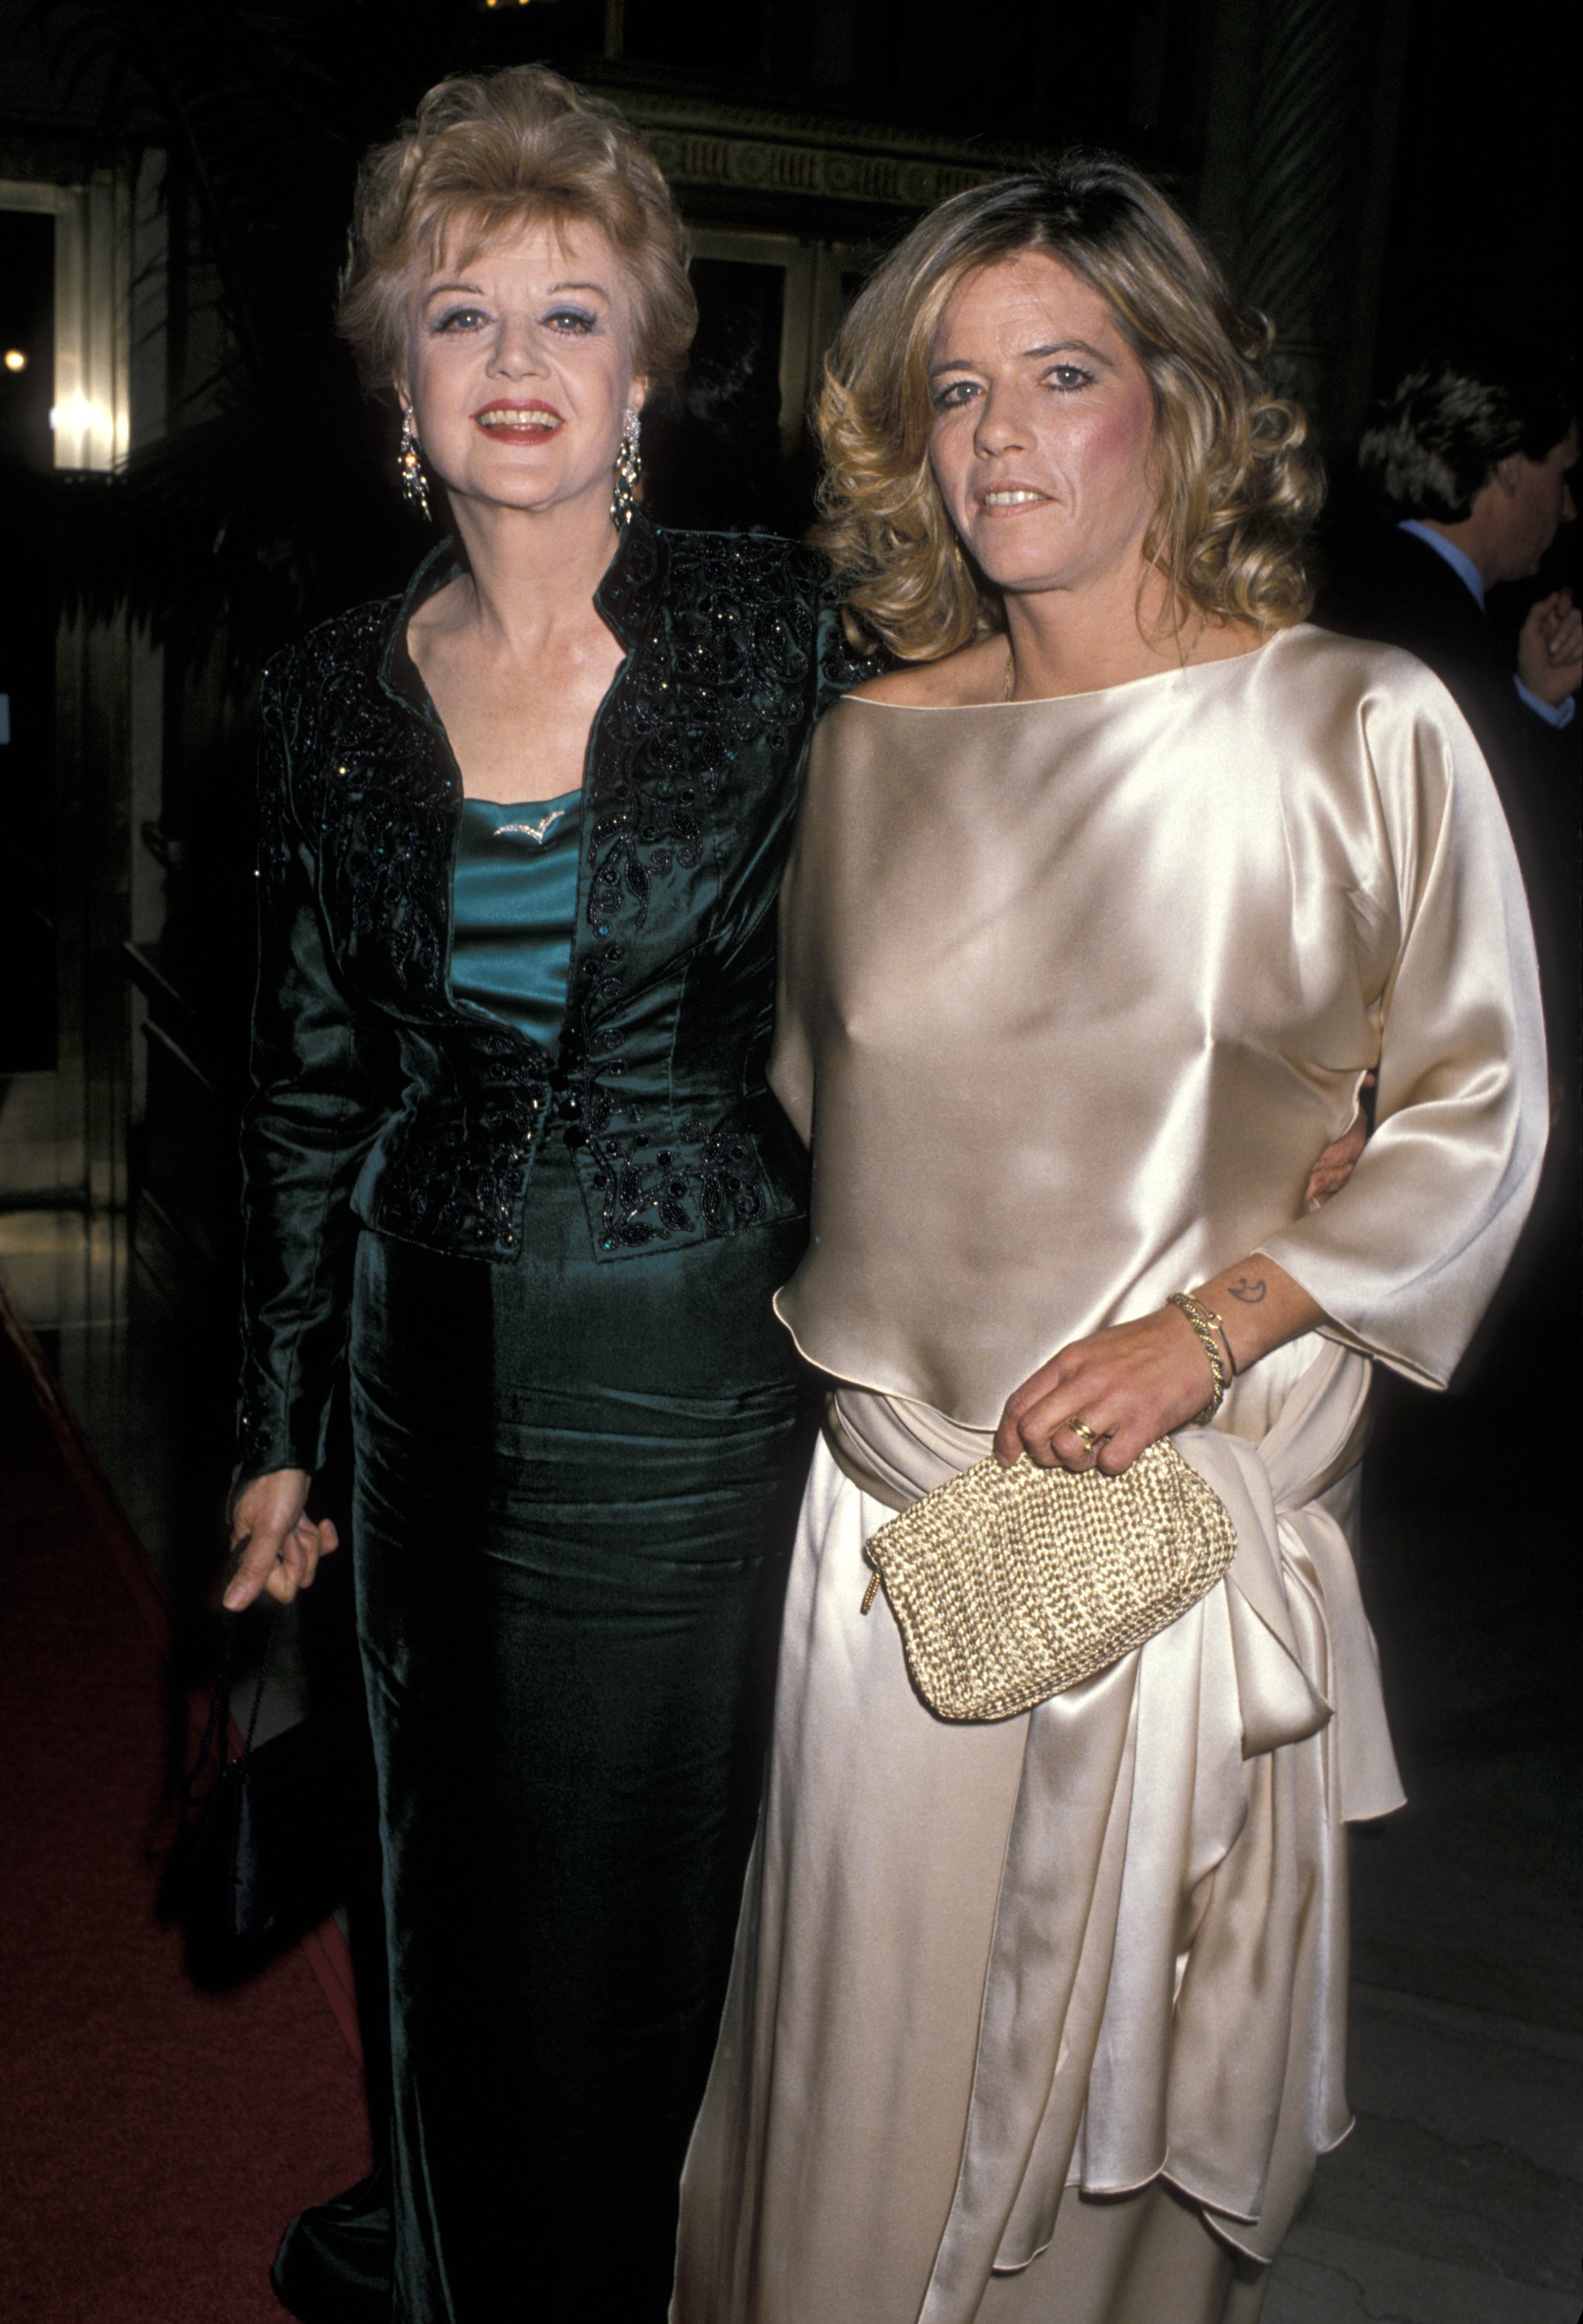 Angela Lansbury and Daughter during "Murder, She Wrote" 100th Episode Celebration at Biltmore Hotel in Los Angeles, California, United States. | Source: Getty Images